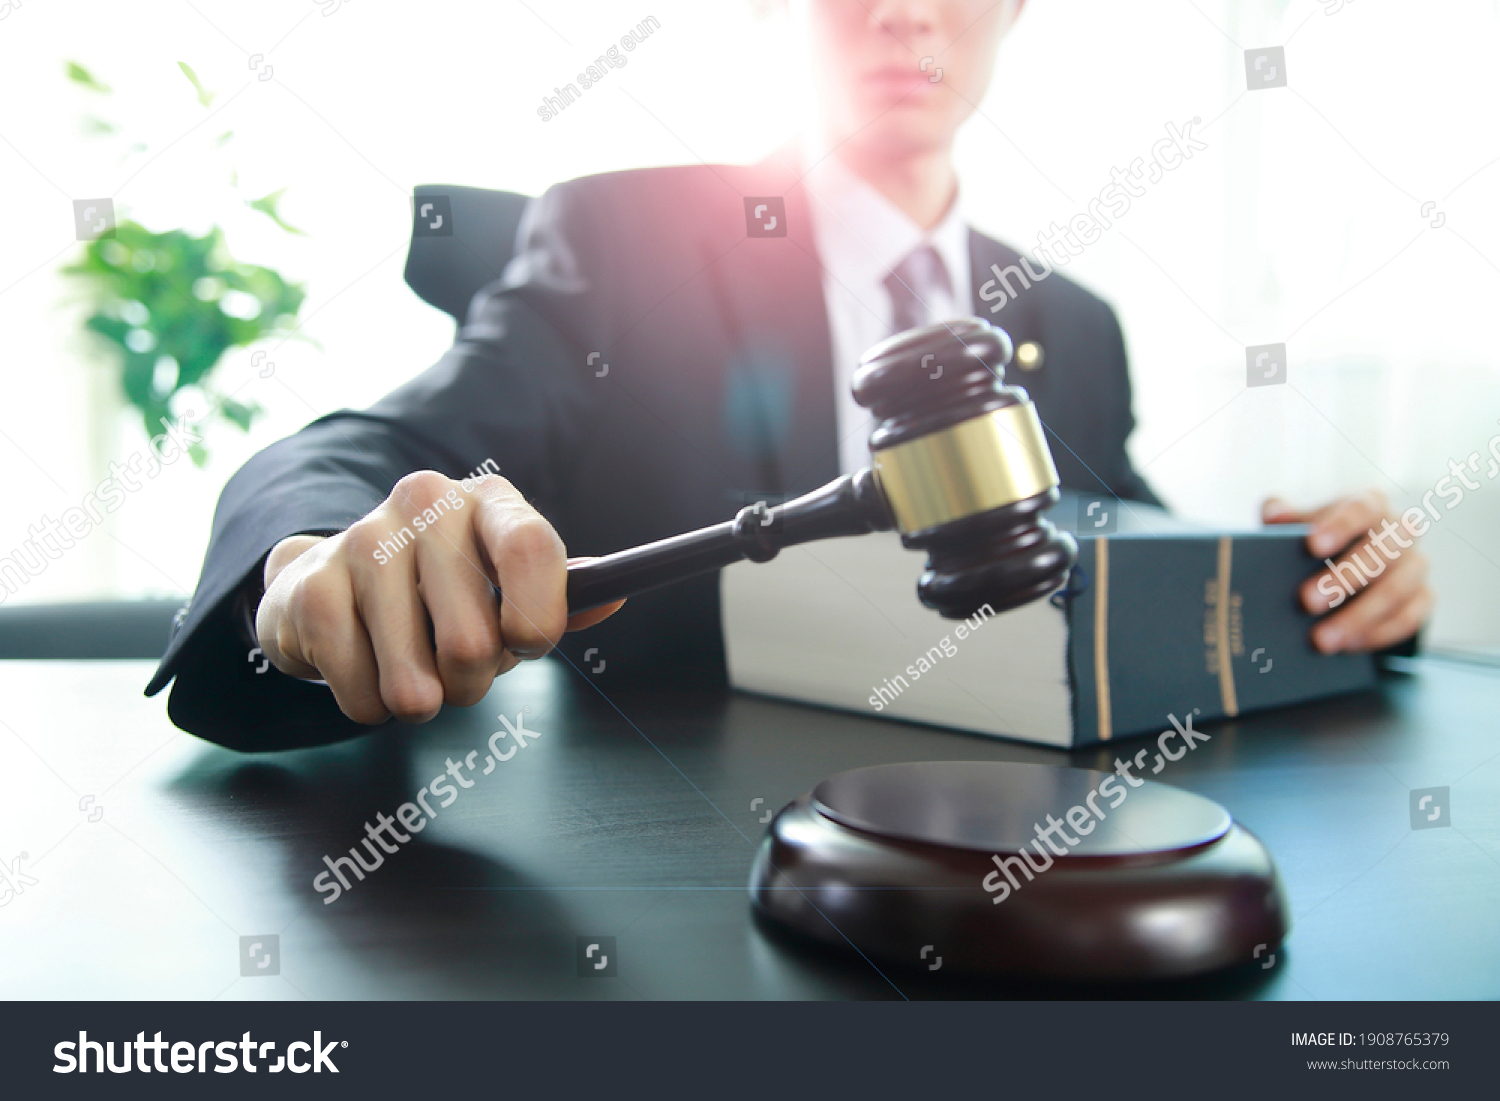 Justice lawyer holding judge gavel, Businessman in suit or lawyer, Advice and Legal services Concept.
 #1908765379